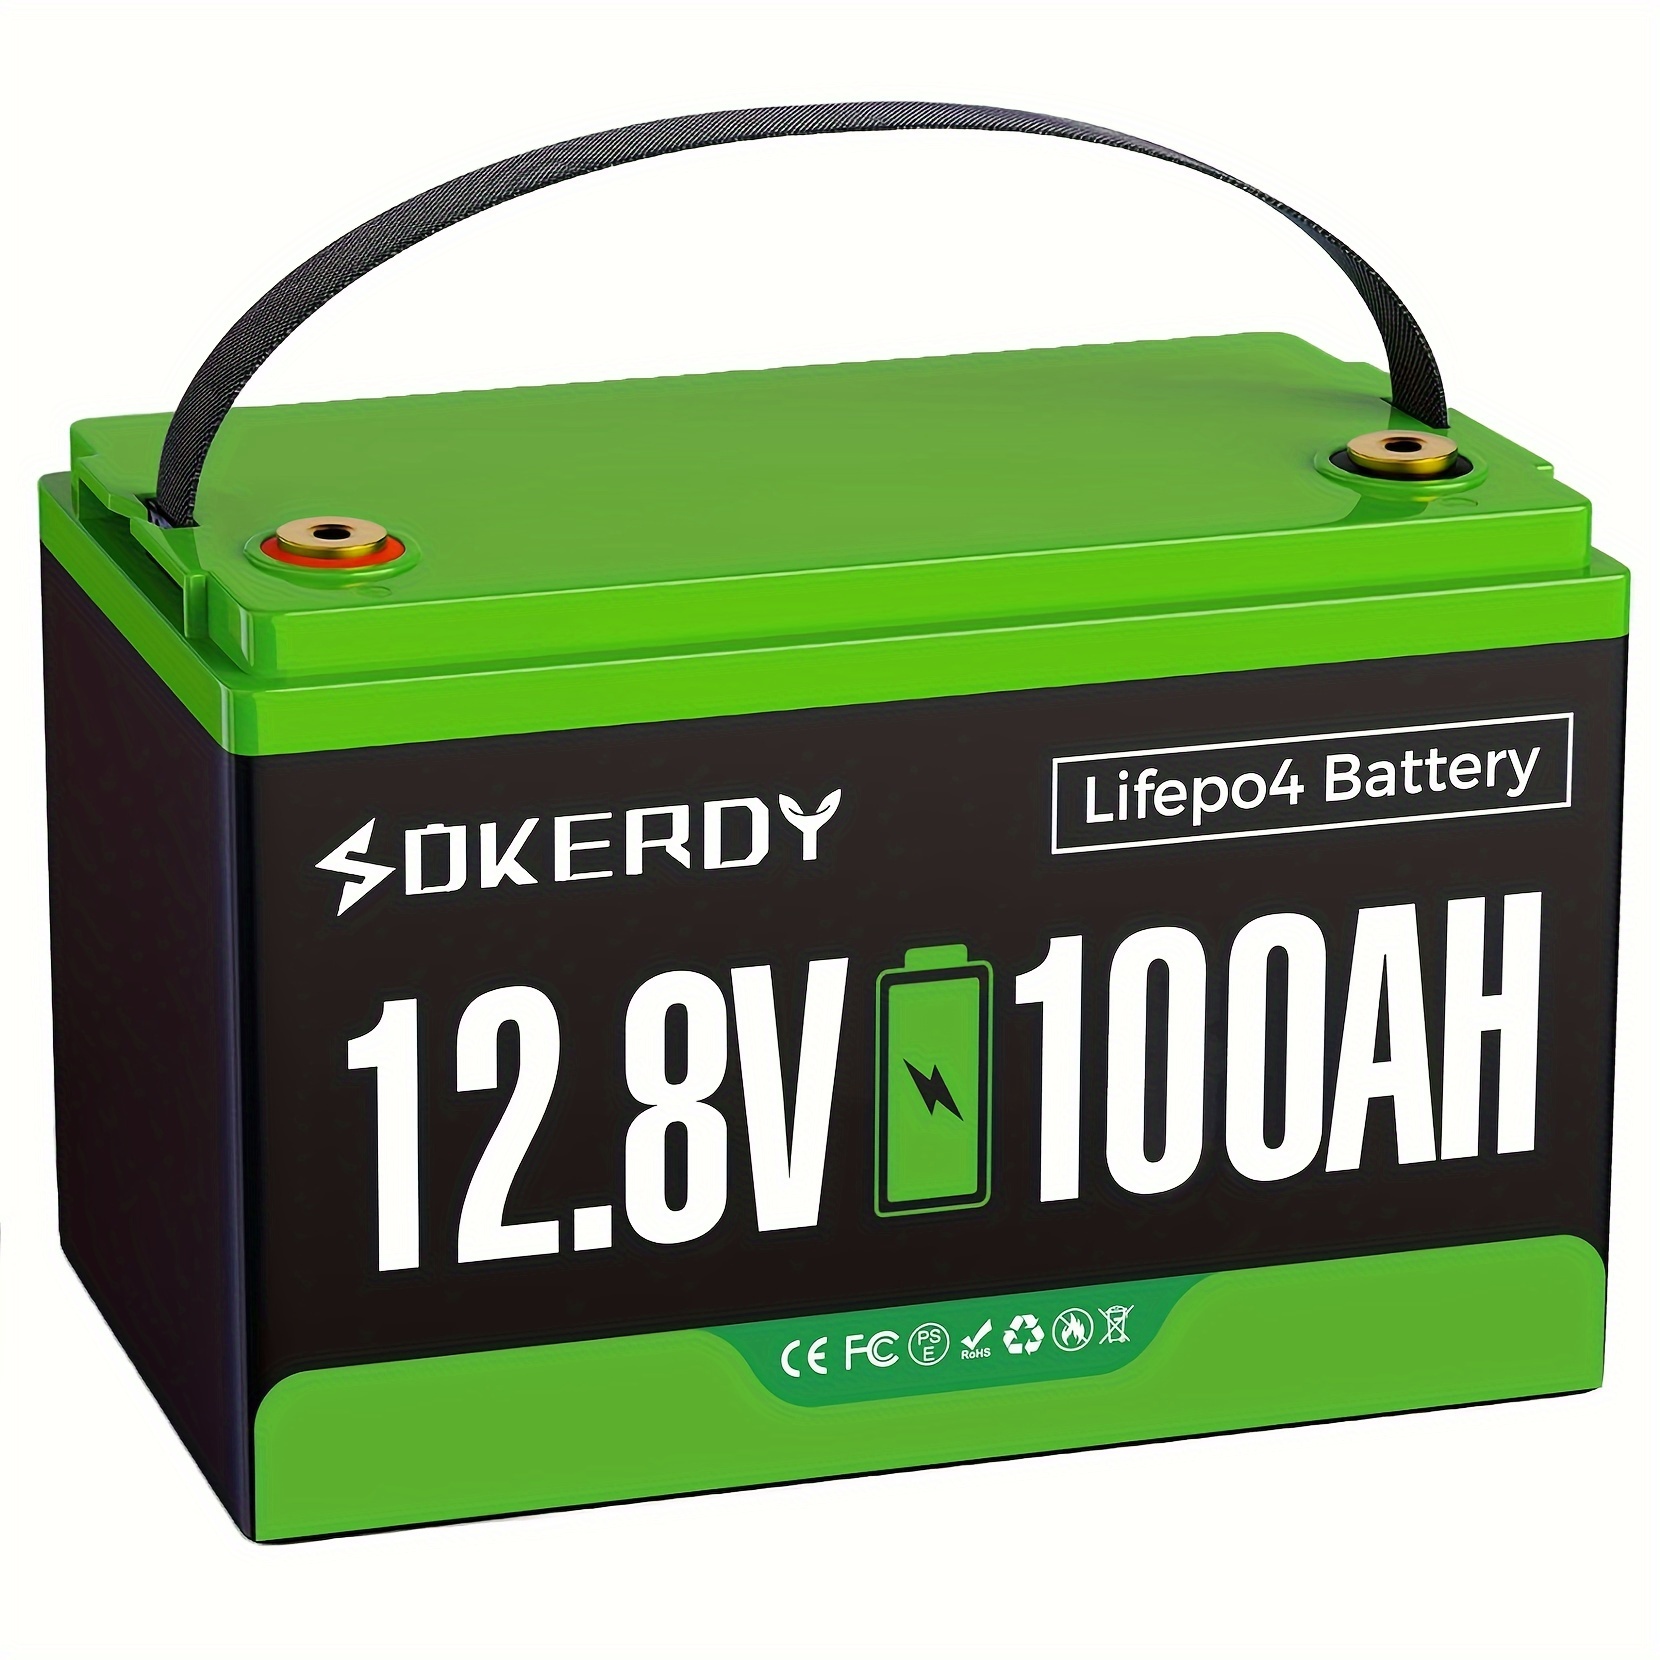 

Lifepo4 Battery 12v 100ah Lithium Battery, Built-in 100a Bms, 3c Discharge, 15000 Cycles, Perfect For Golf Cart, Trolling Motor, Marine, Home Energy Storage And Off-grid